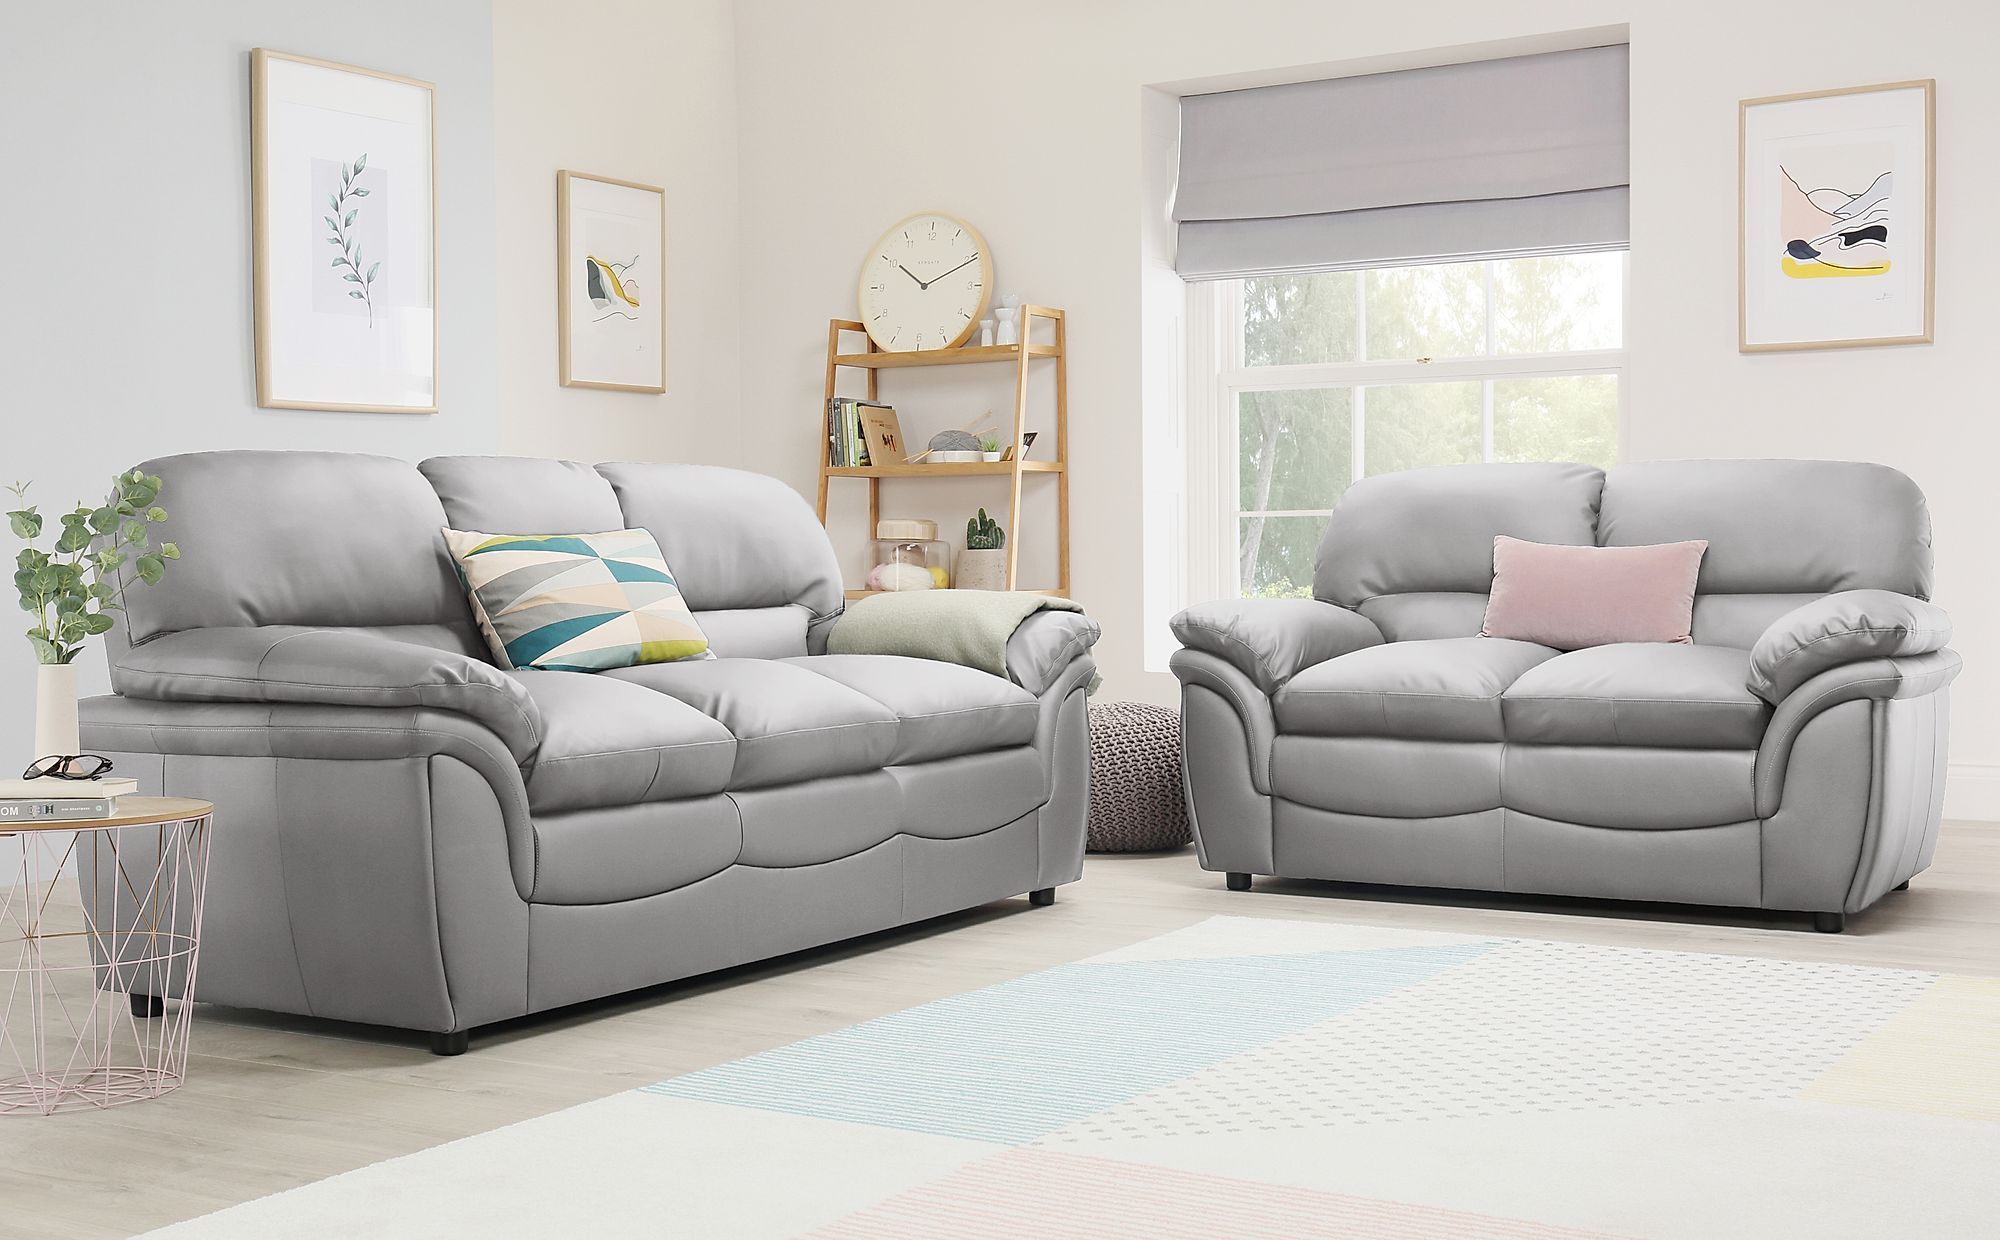 Rochester Light Grey Leather 3+2 Seater Sofa Set | Furniture Choice Regarding Sofas In Light Grey (View 9 of 20)